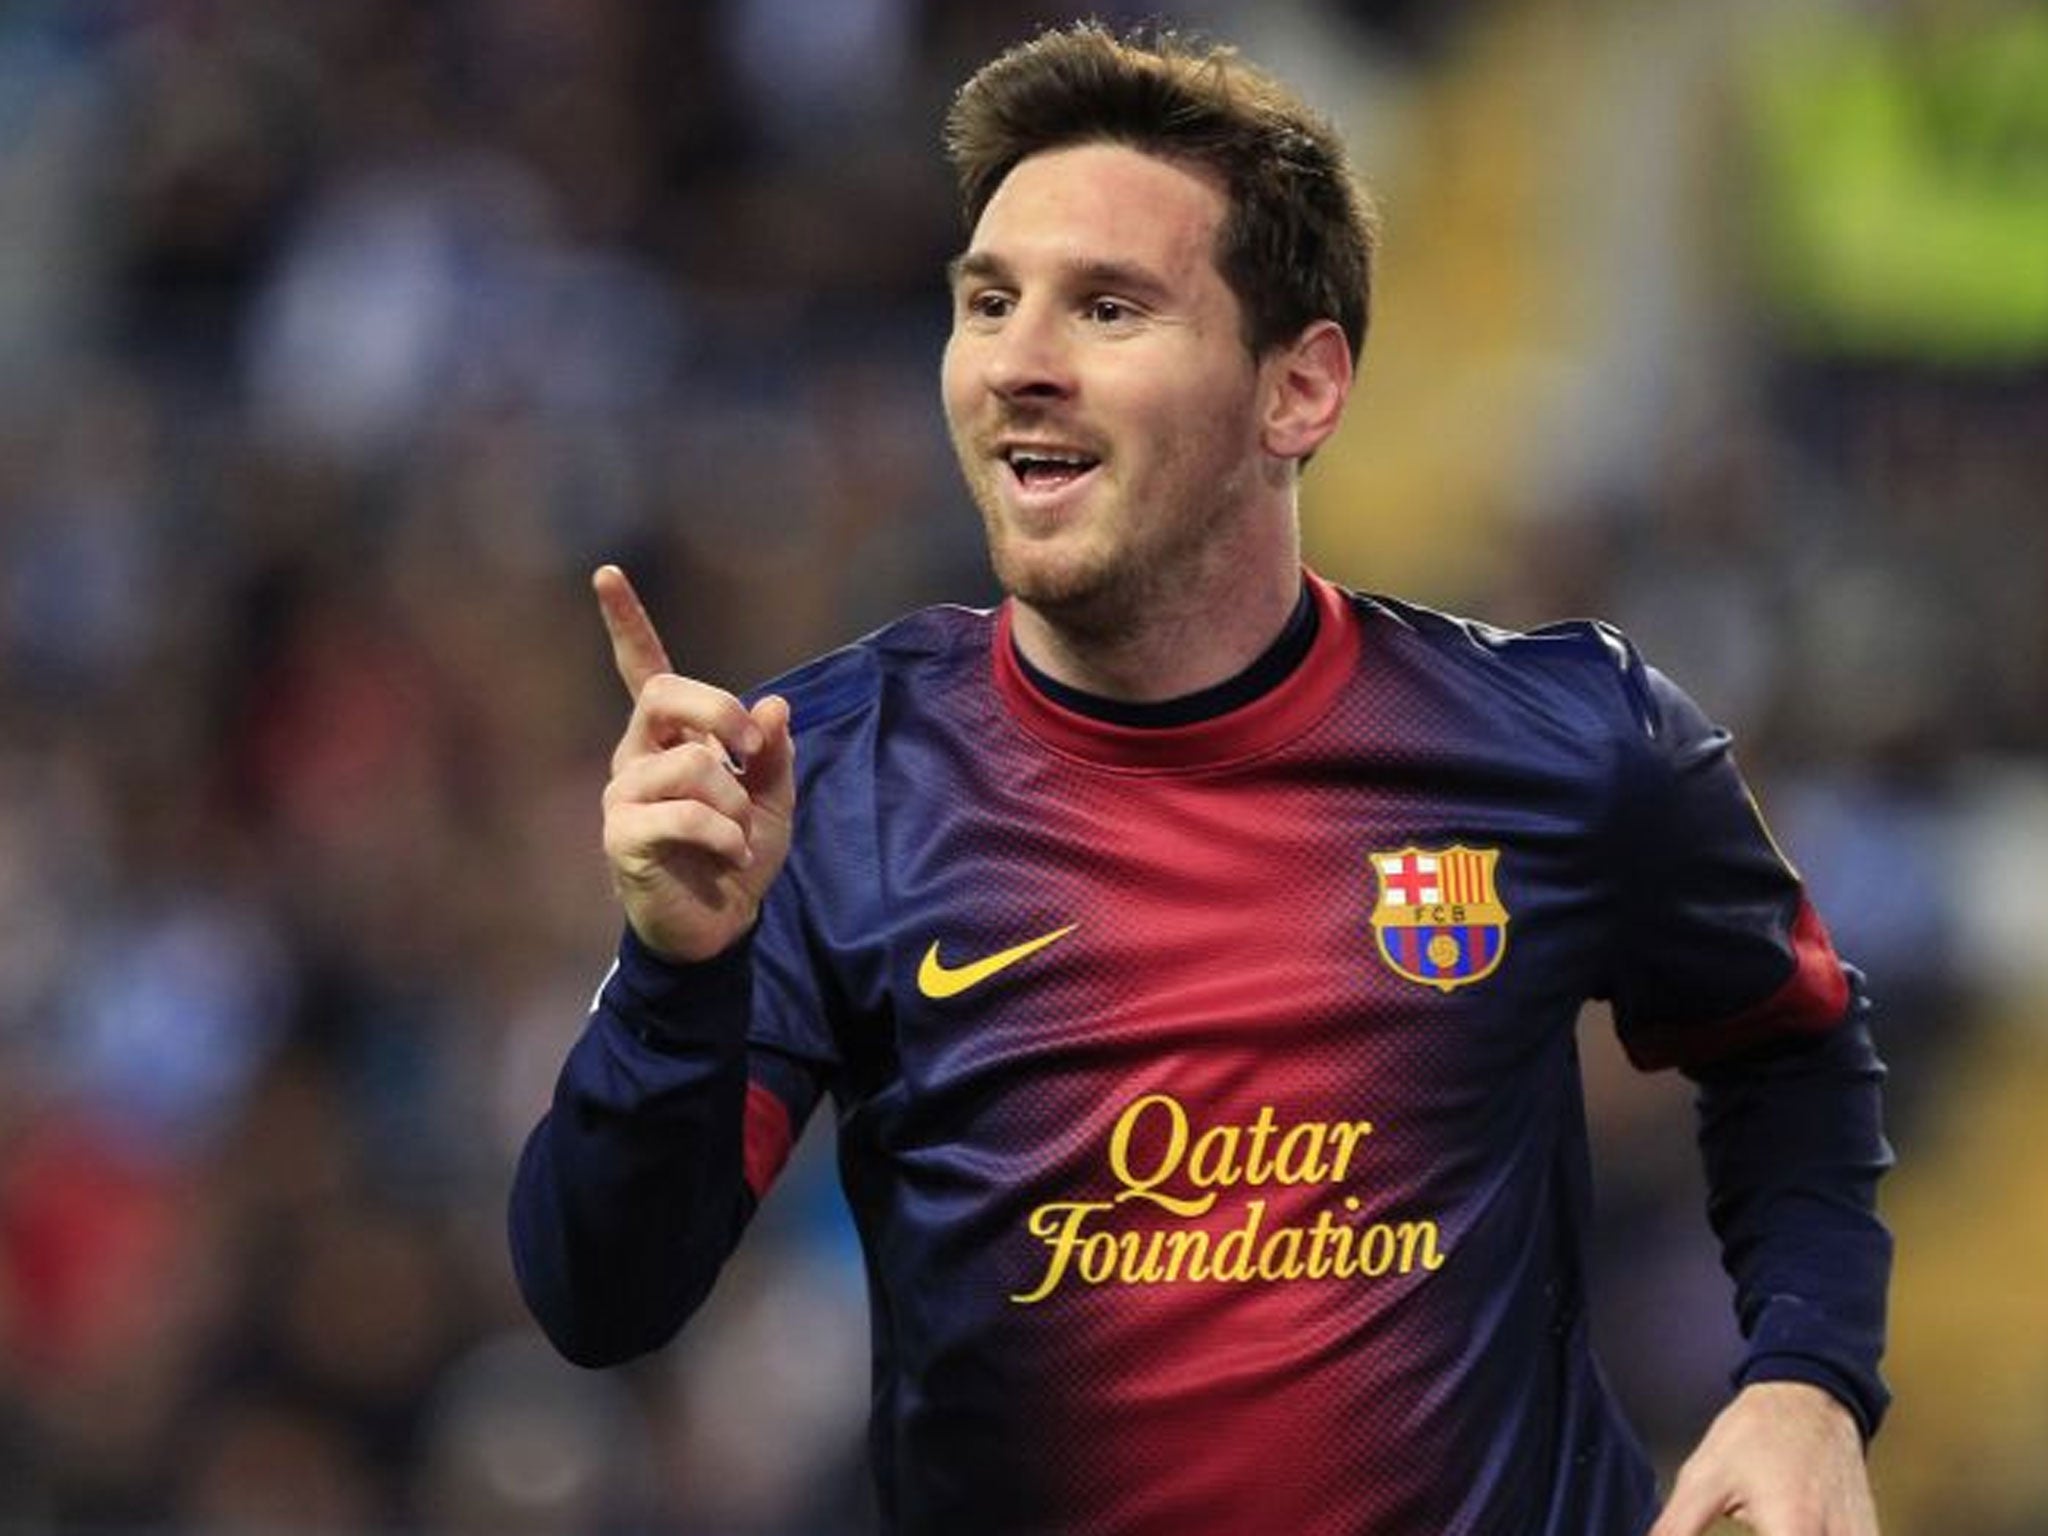 Messi is on target to break his own Spanish league record of 50 goals from last season